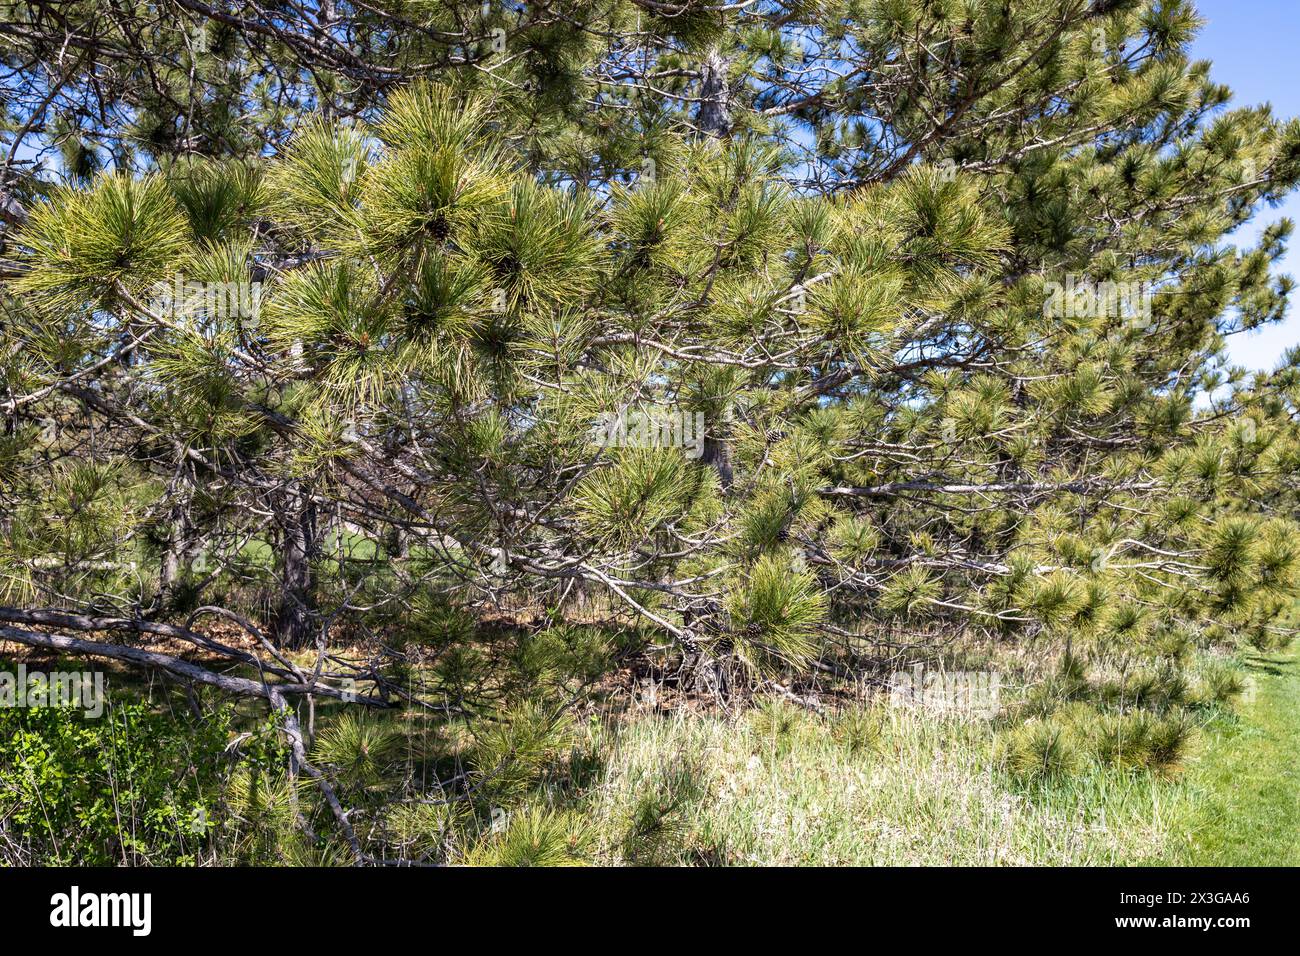 Full frame close-up texture background of long needle pine tree branches in full sun Stock Photo